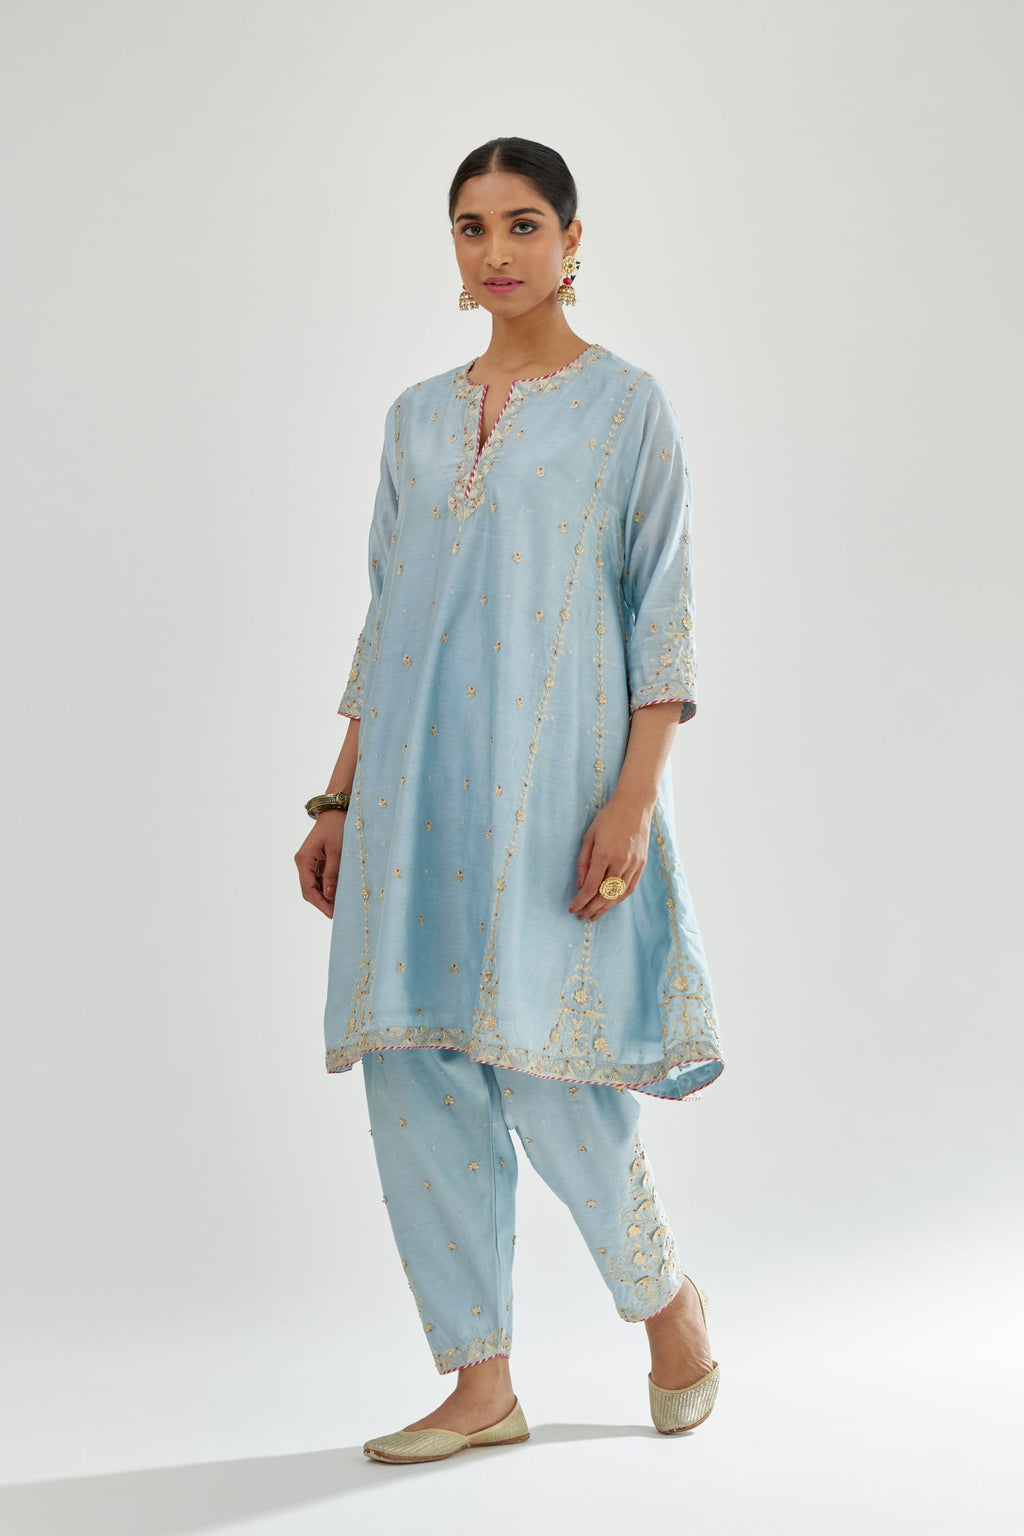 Blue silk chanderi short kalidar kurta set with all-over delicate zari bootis, detailed with dori embroidery and contrast bead work.